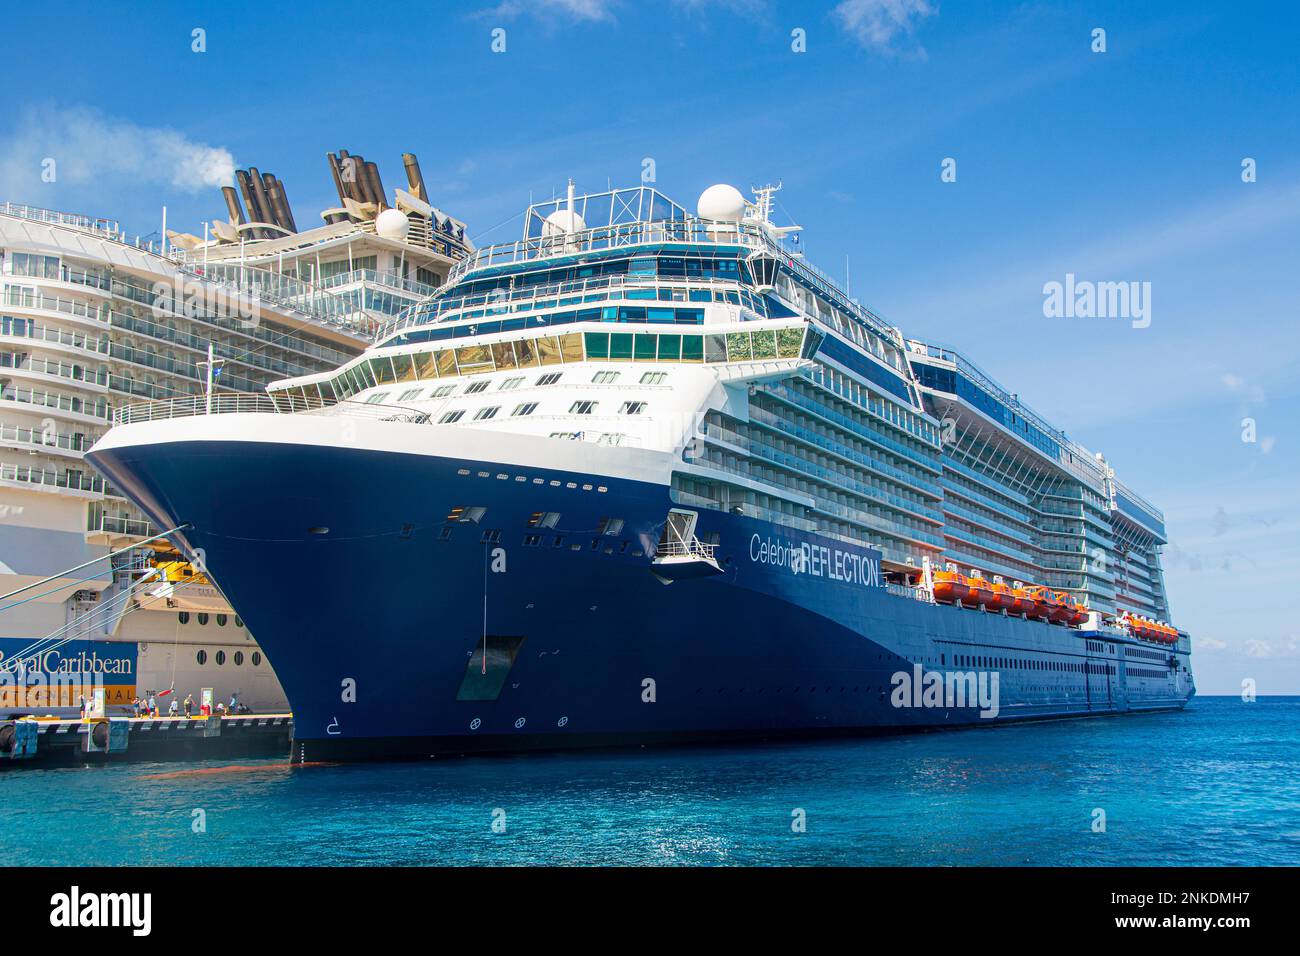 The Celebrity Reflection docked in Cozumel, Mexico. Stock Photo